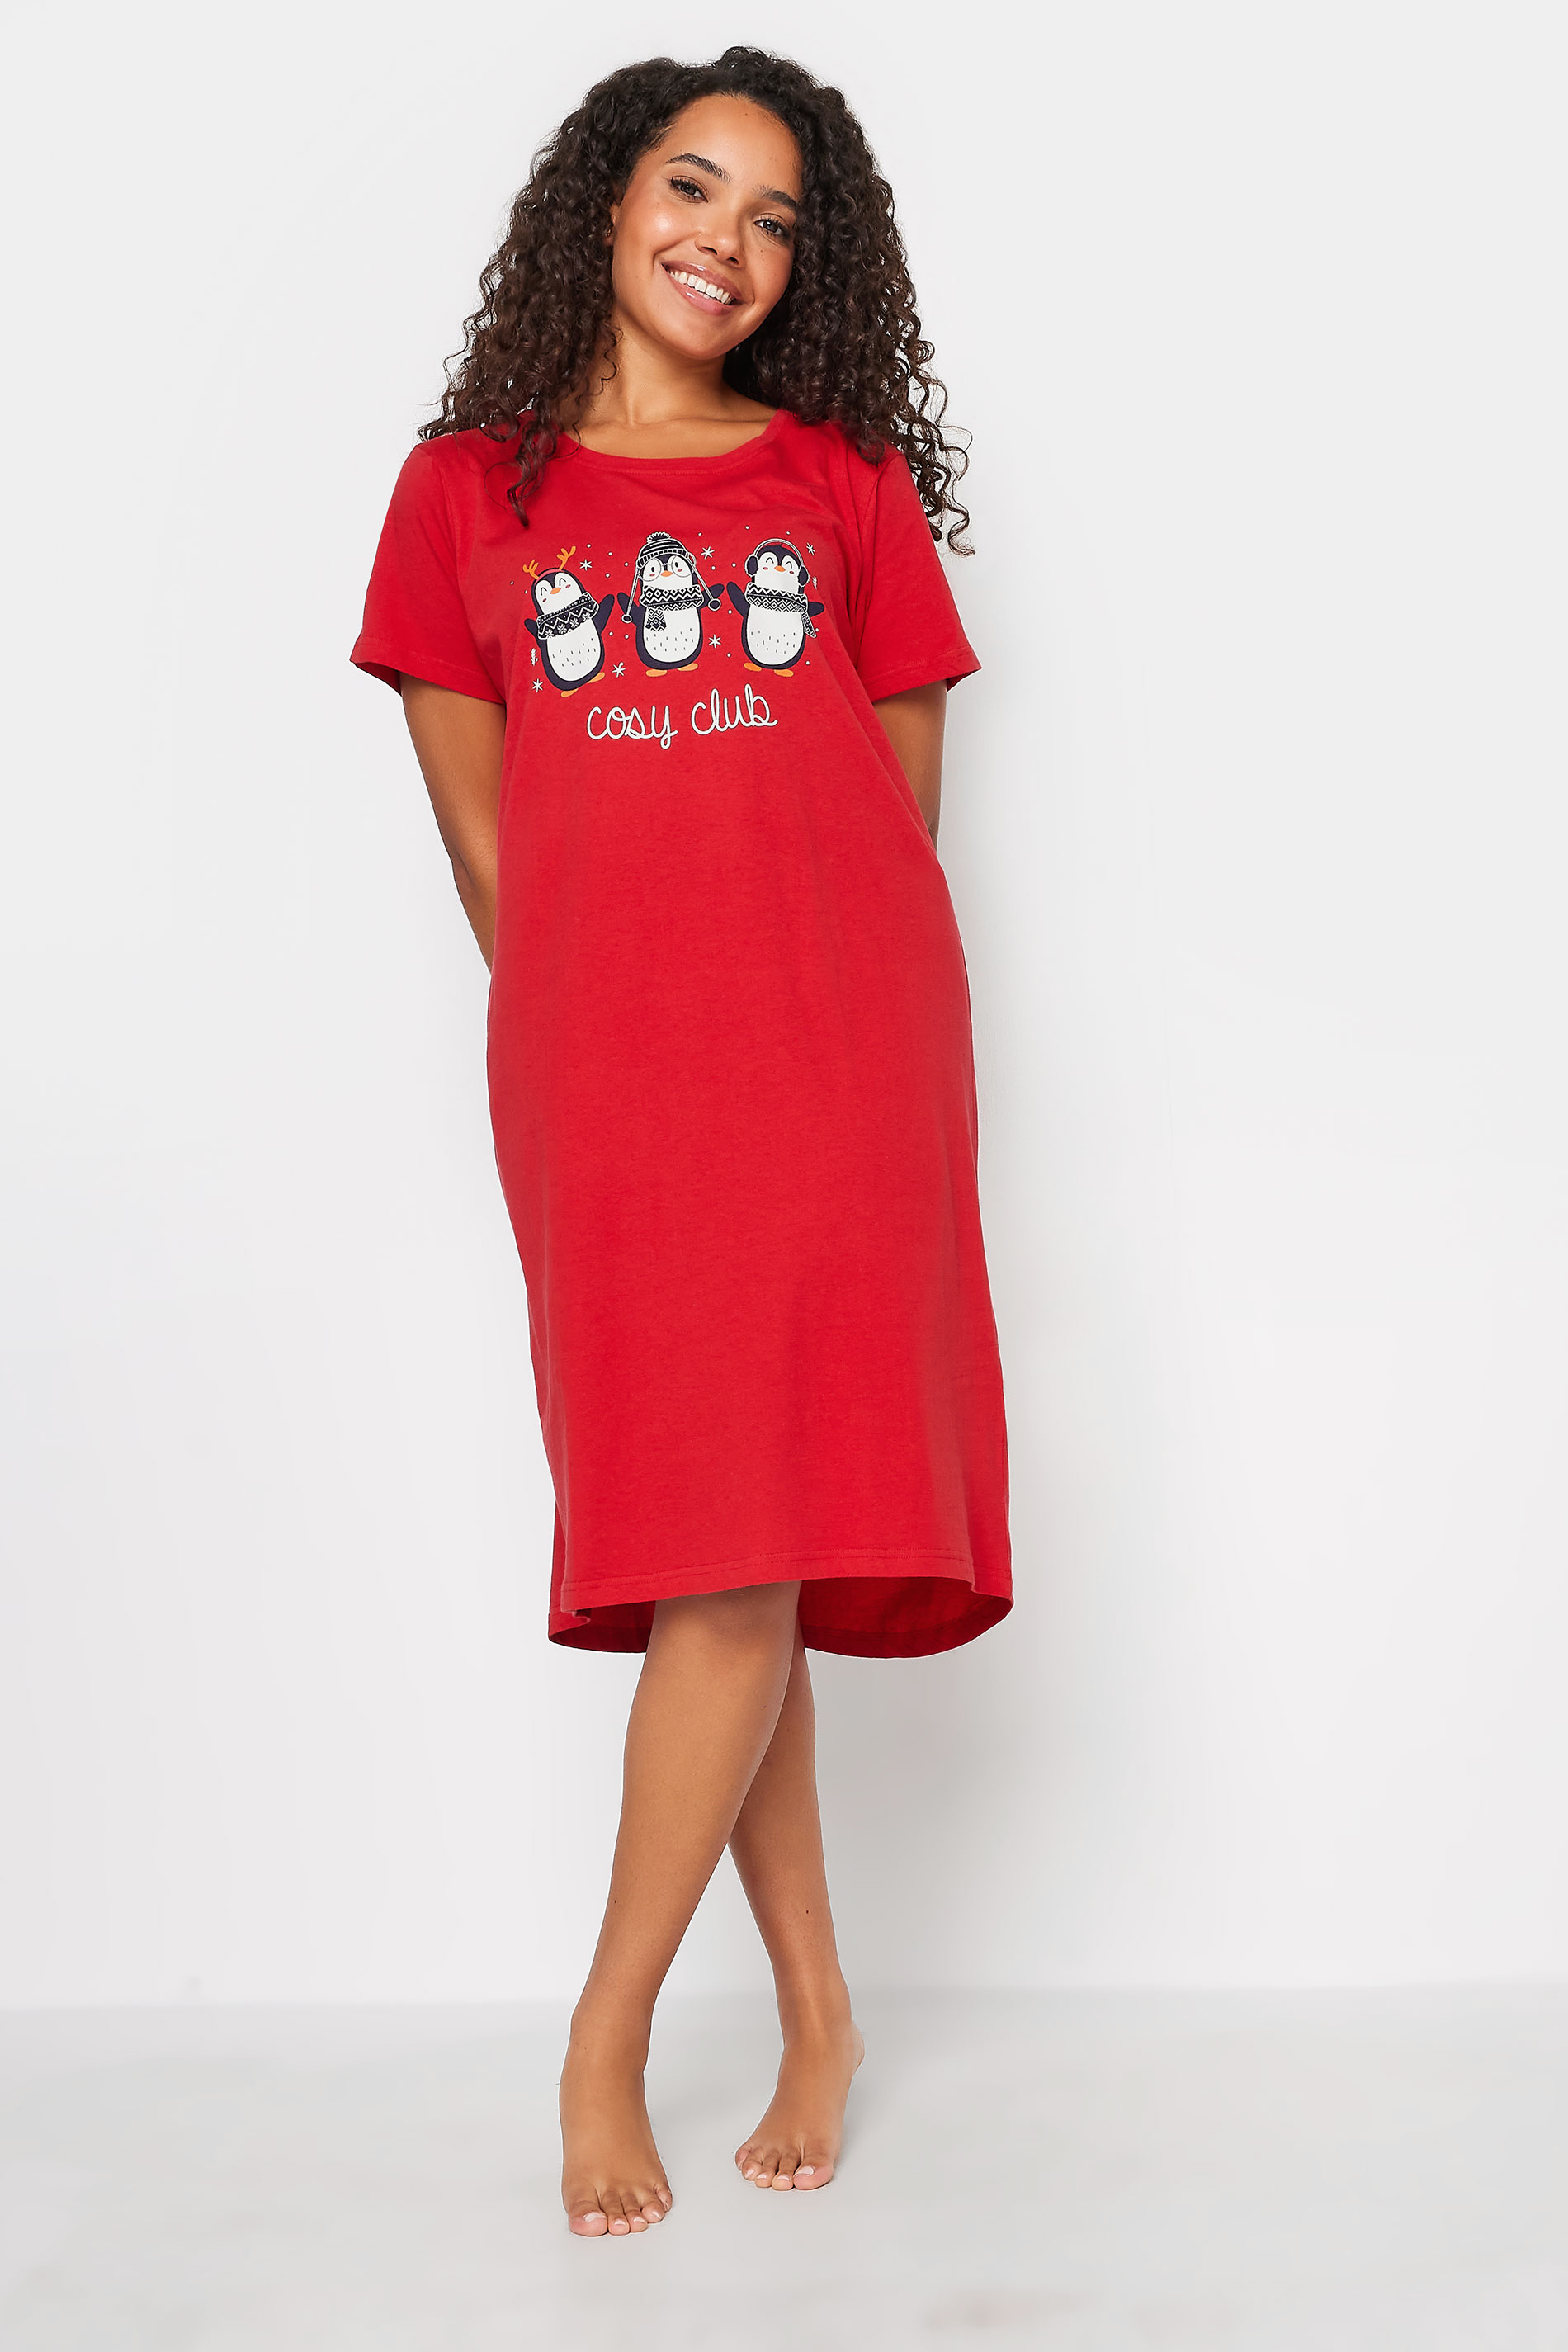 M&Co Red 'Cosy Club' Christmas Penguin Print Cotton Nightdress | M&Co 3